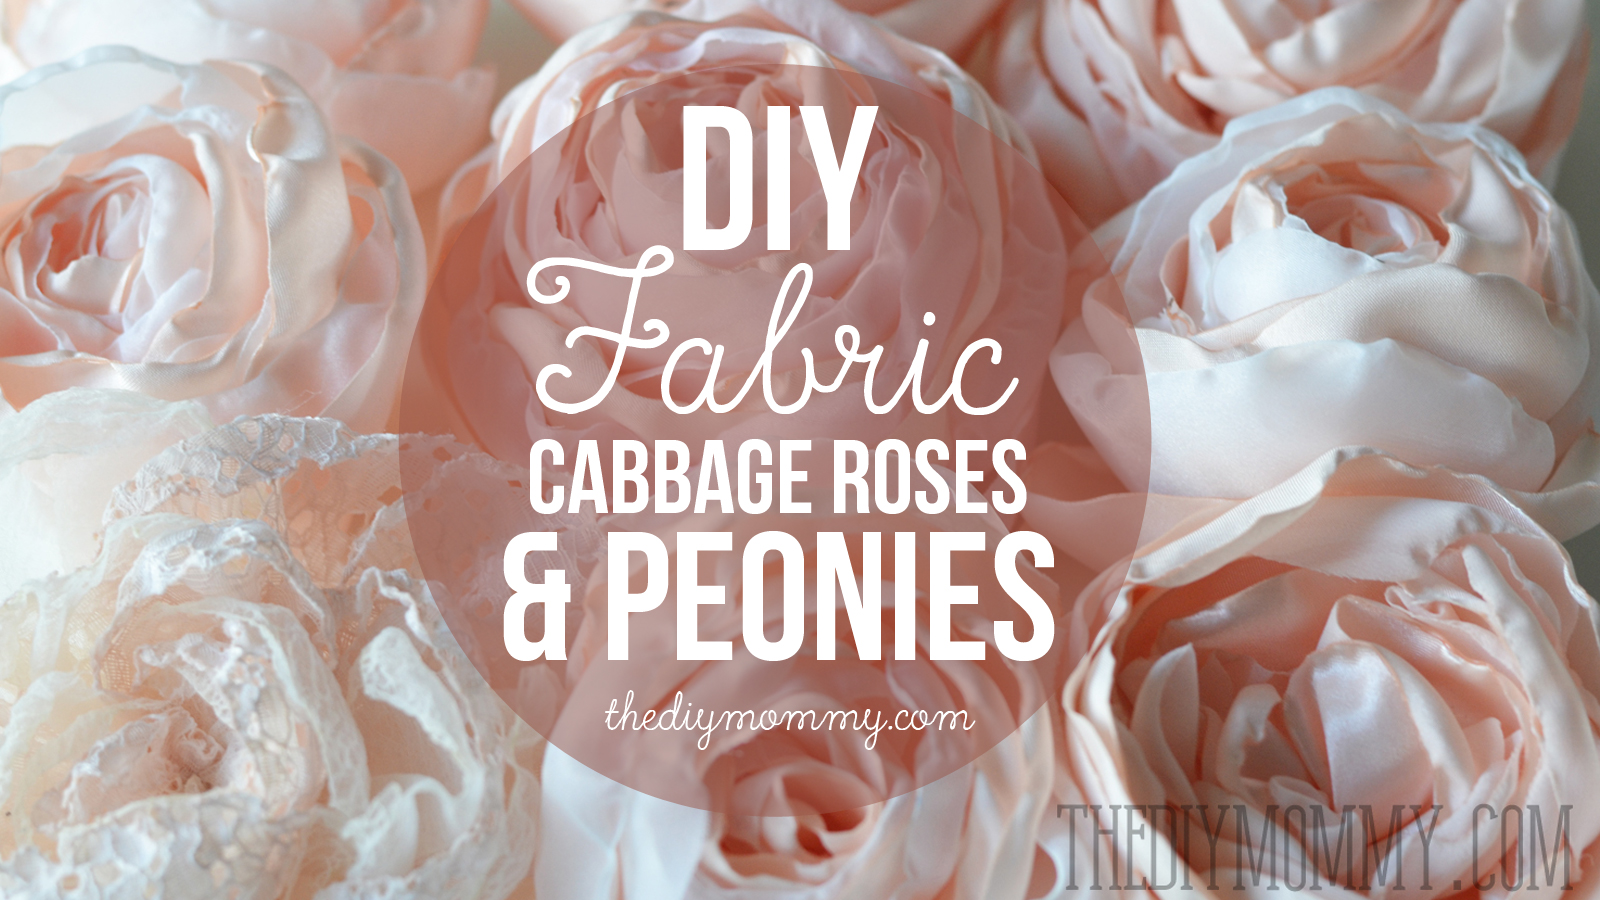 Video Tutorial: How to make fabric cabbage roses and peony flowers. So realistic & gorgeous!